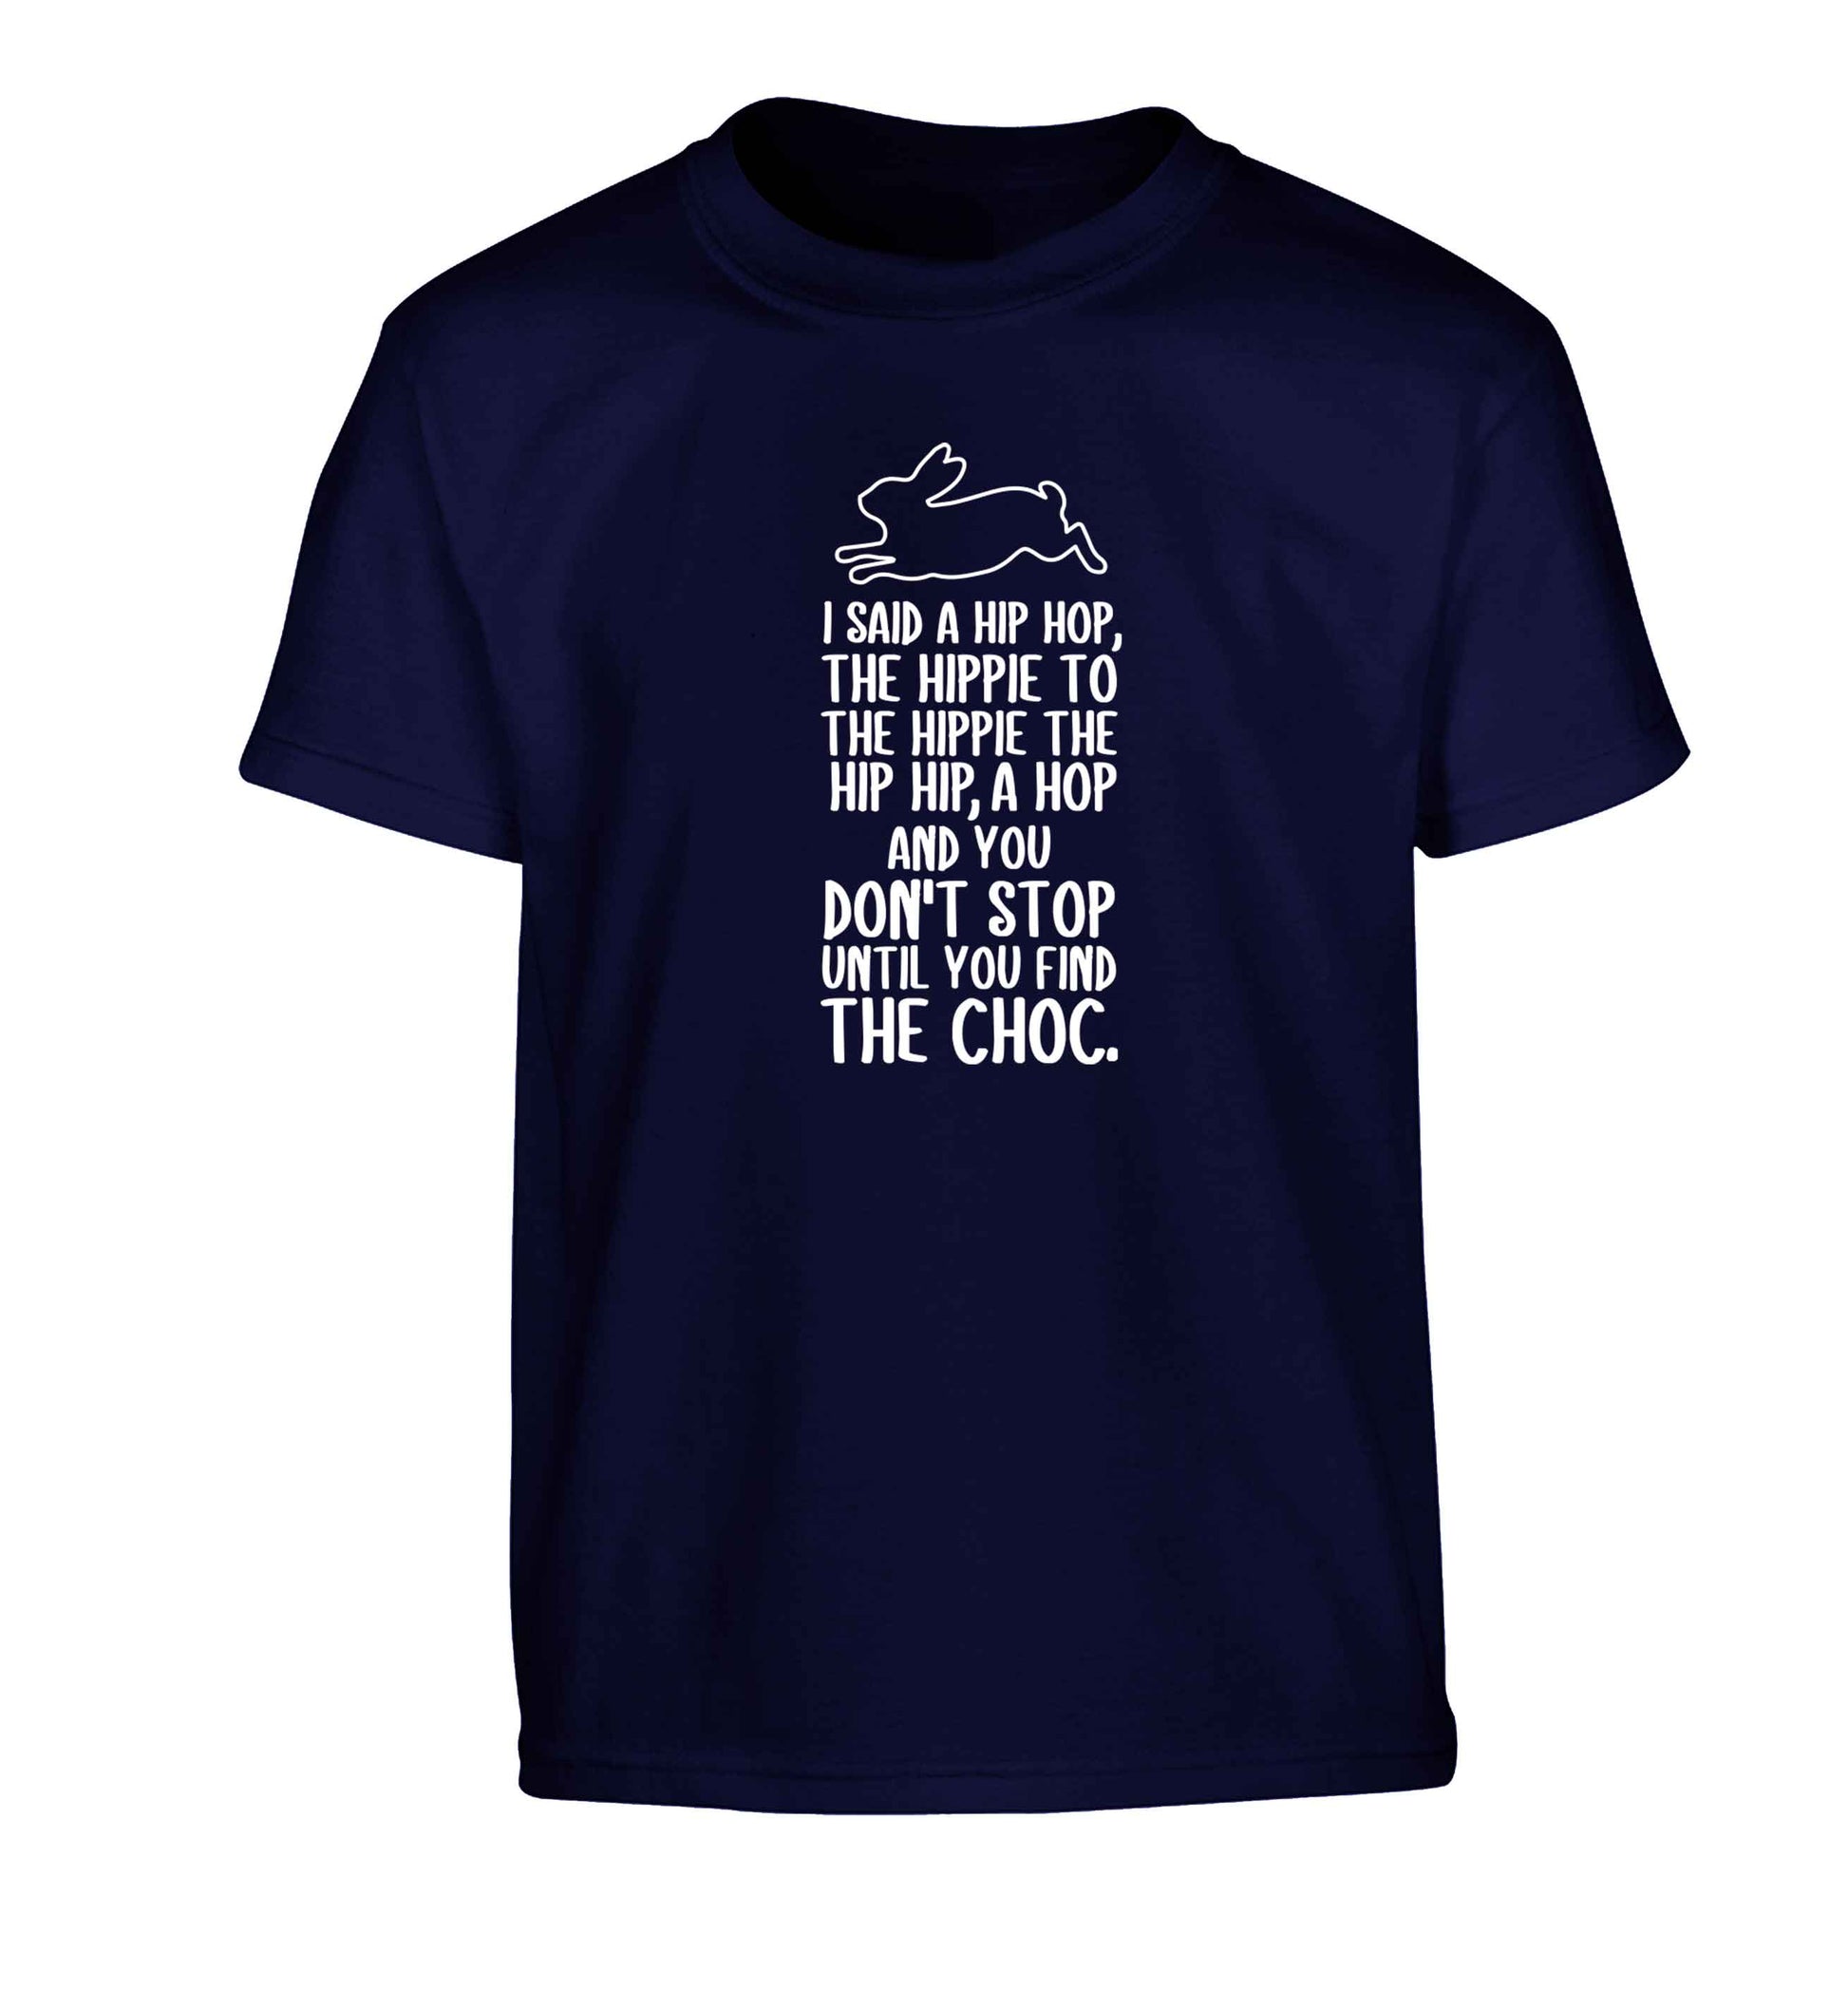 Don't stop until you find the choc Children's navy Tshirt 12-13 Years